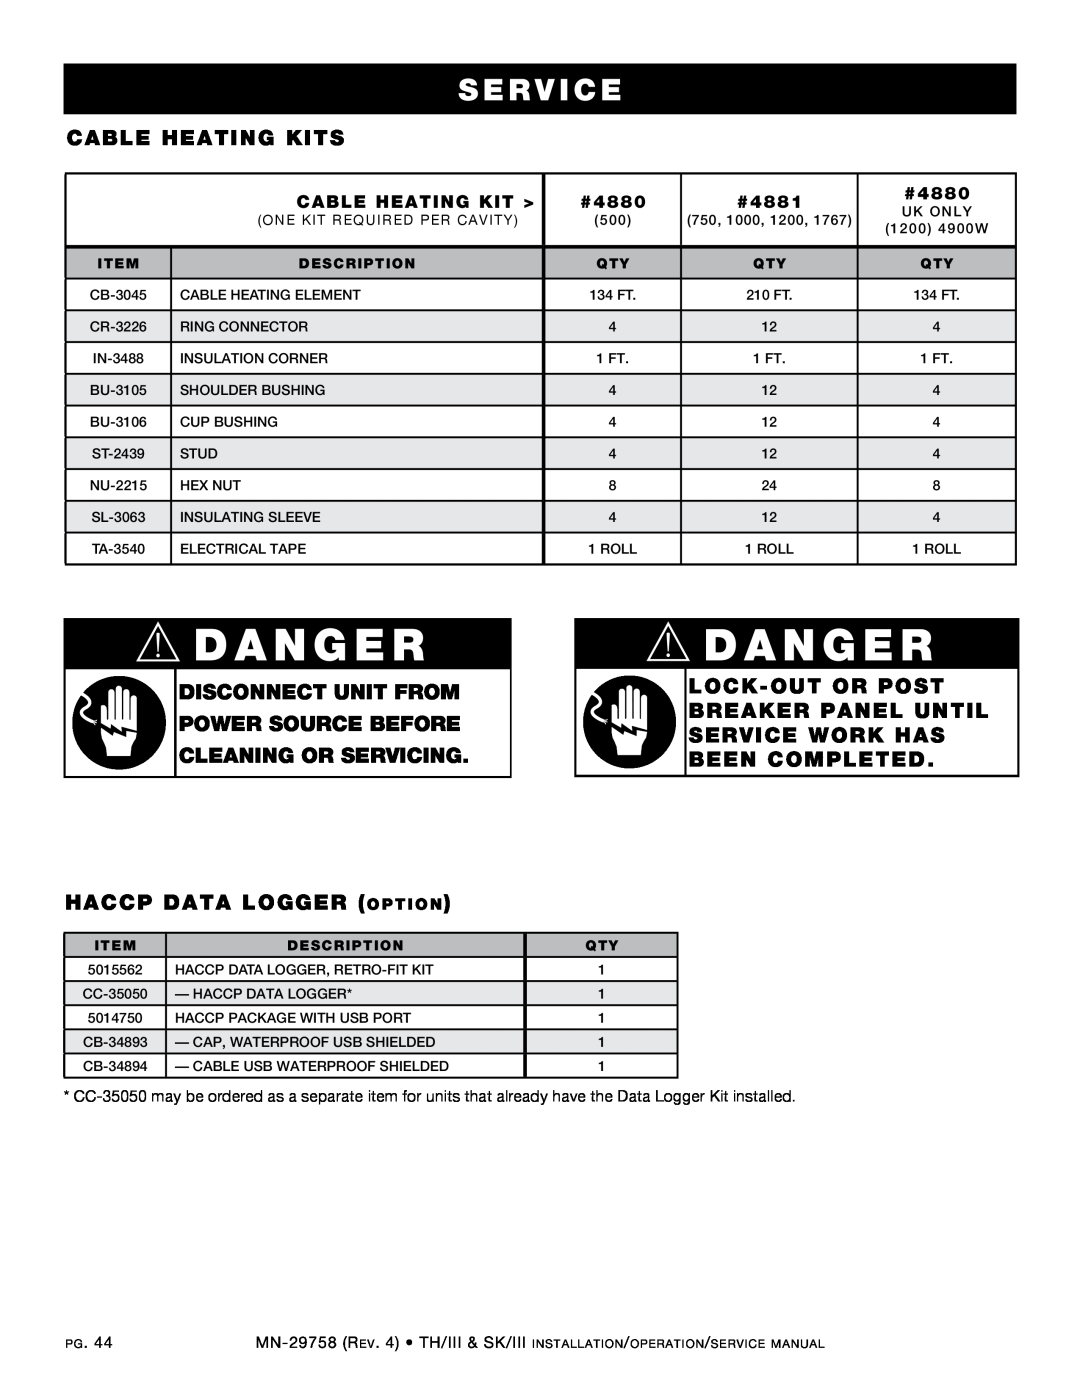 Alto-Shaam 300-TH/III, 1000-TH/III manual dANgER, Se r v ice, Cable Heating Kits, dIScONNEcT UNIT FROM pOwER SOURcE BEFORE 